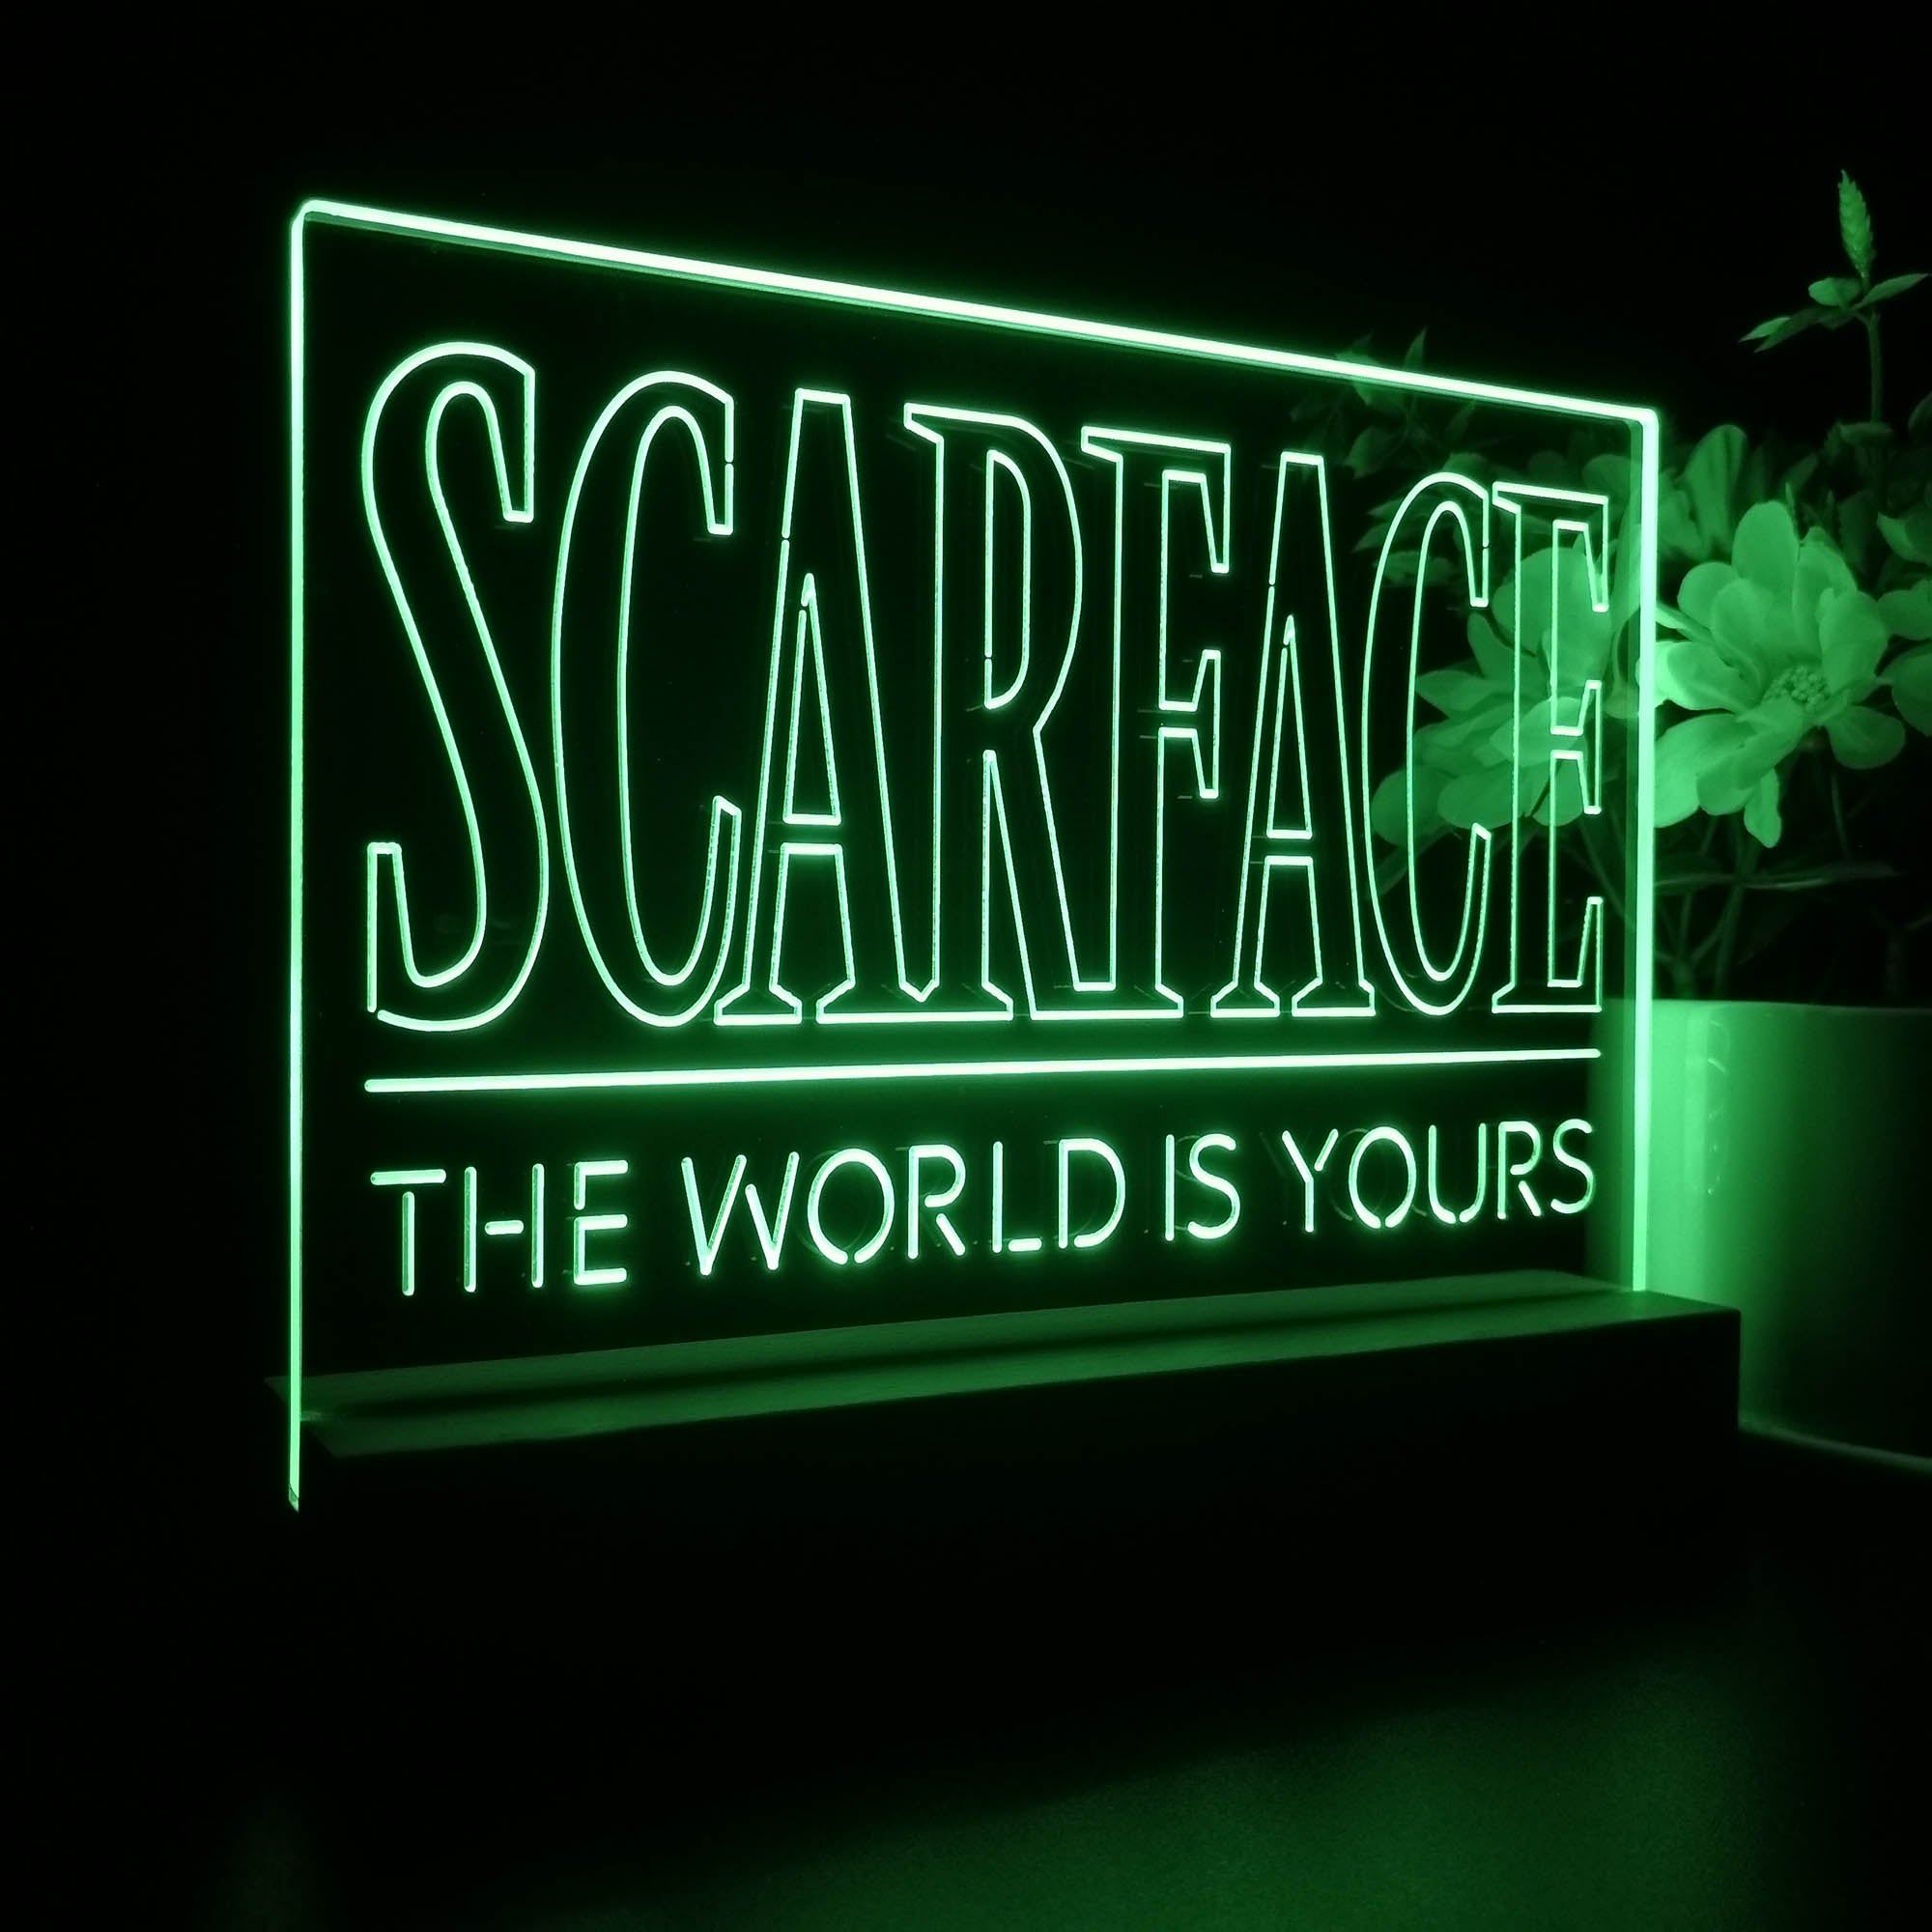 Scarface The World is Yours Night Light LED Sign